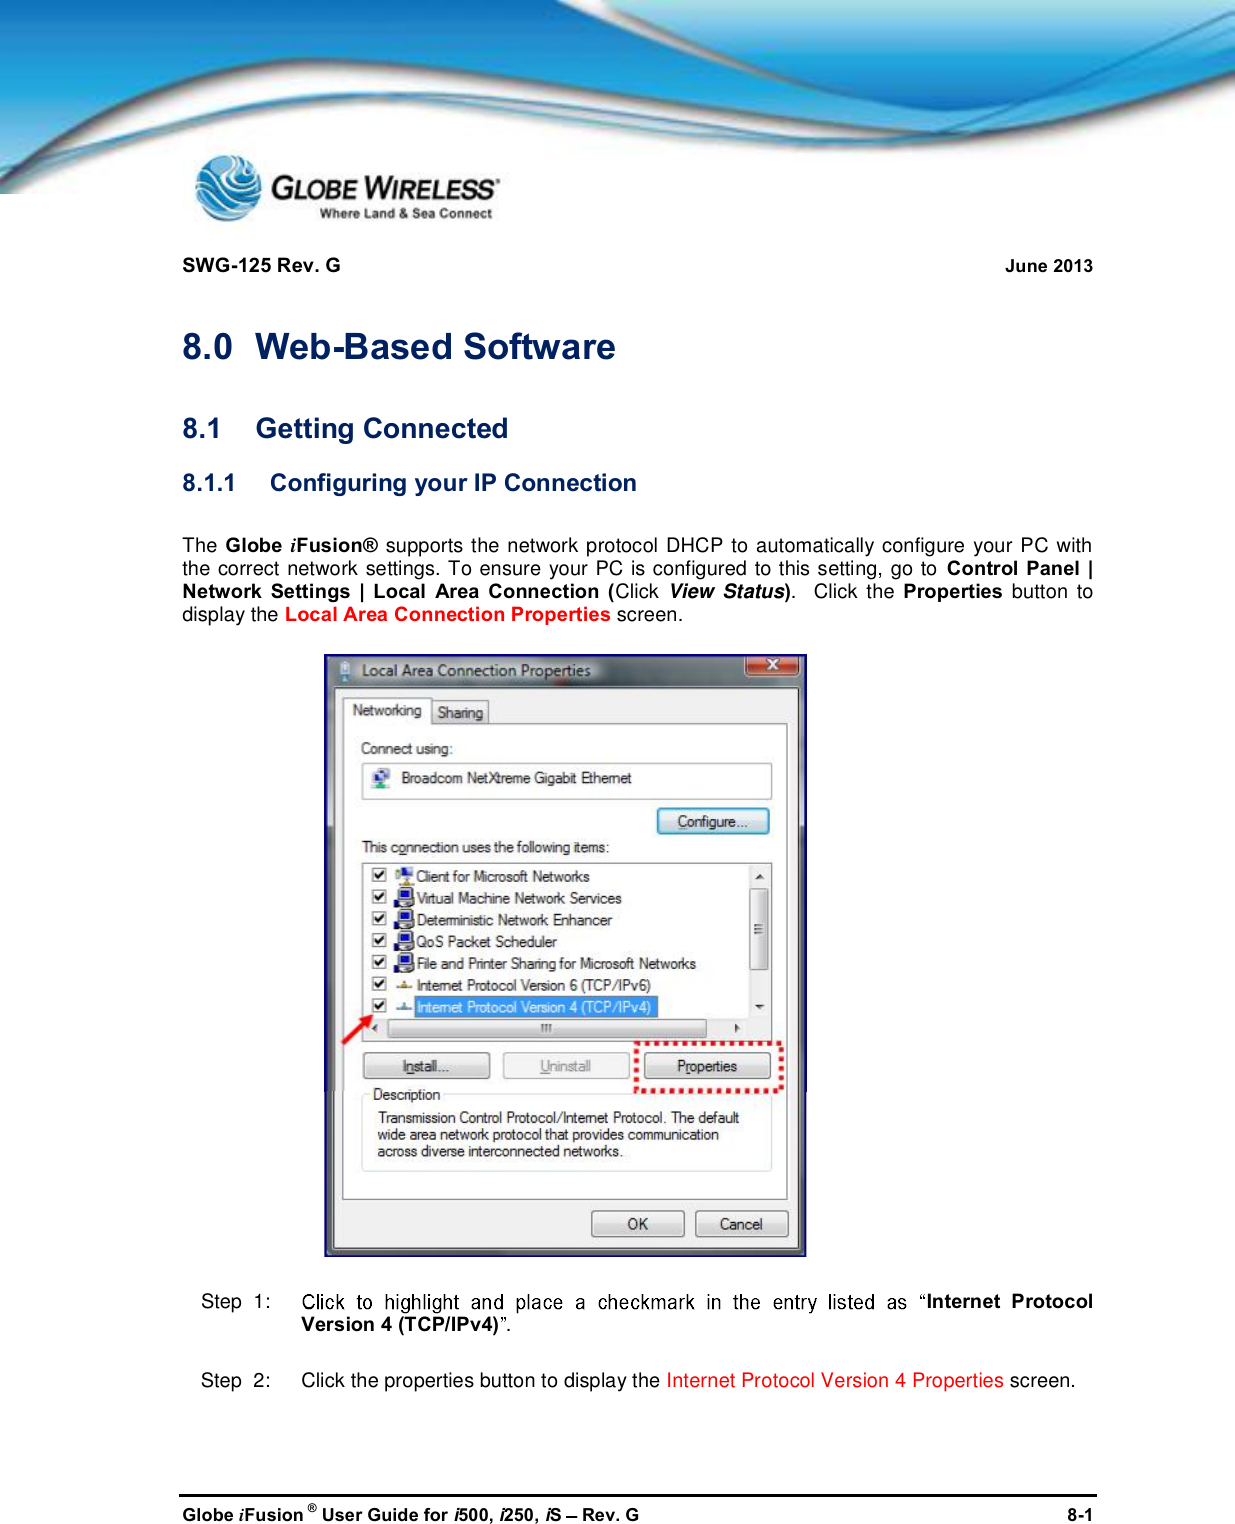 SWG-125 Rev. G June 2013Globe iFusion ®User Guide for i500, i250, iSRev. G 8-18.0 Web-Based Software8.1 Getting Connected8.1.1 Configuring your IP ConnectionThe Globe iFusion® supports the network protocol DHCP to automatically configure your PC withthe correct network settings. To ensure your PC is configured to this setting, go to Control Panel |Network Settings | Local Area Connection (Click View Status). Click the Properties button todisplay the Local Area Connection Properties screen.Step  1: Internet ProtocolVersion 4 (TCP/IPv4) .Step  2:   Click the properties button to display the Internet Protocol Version 4 Properties screen.